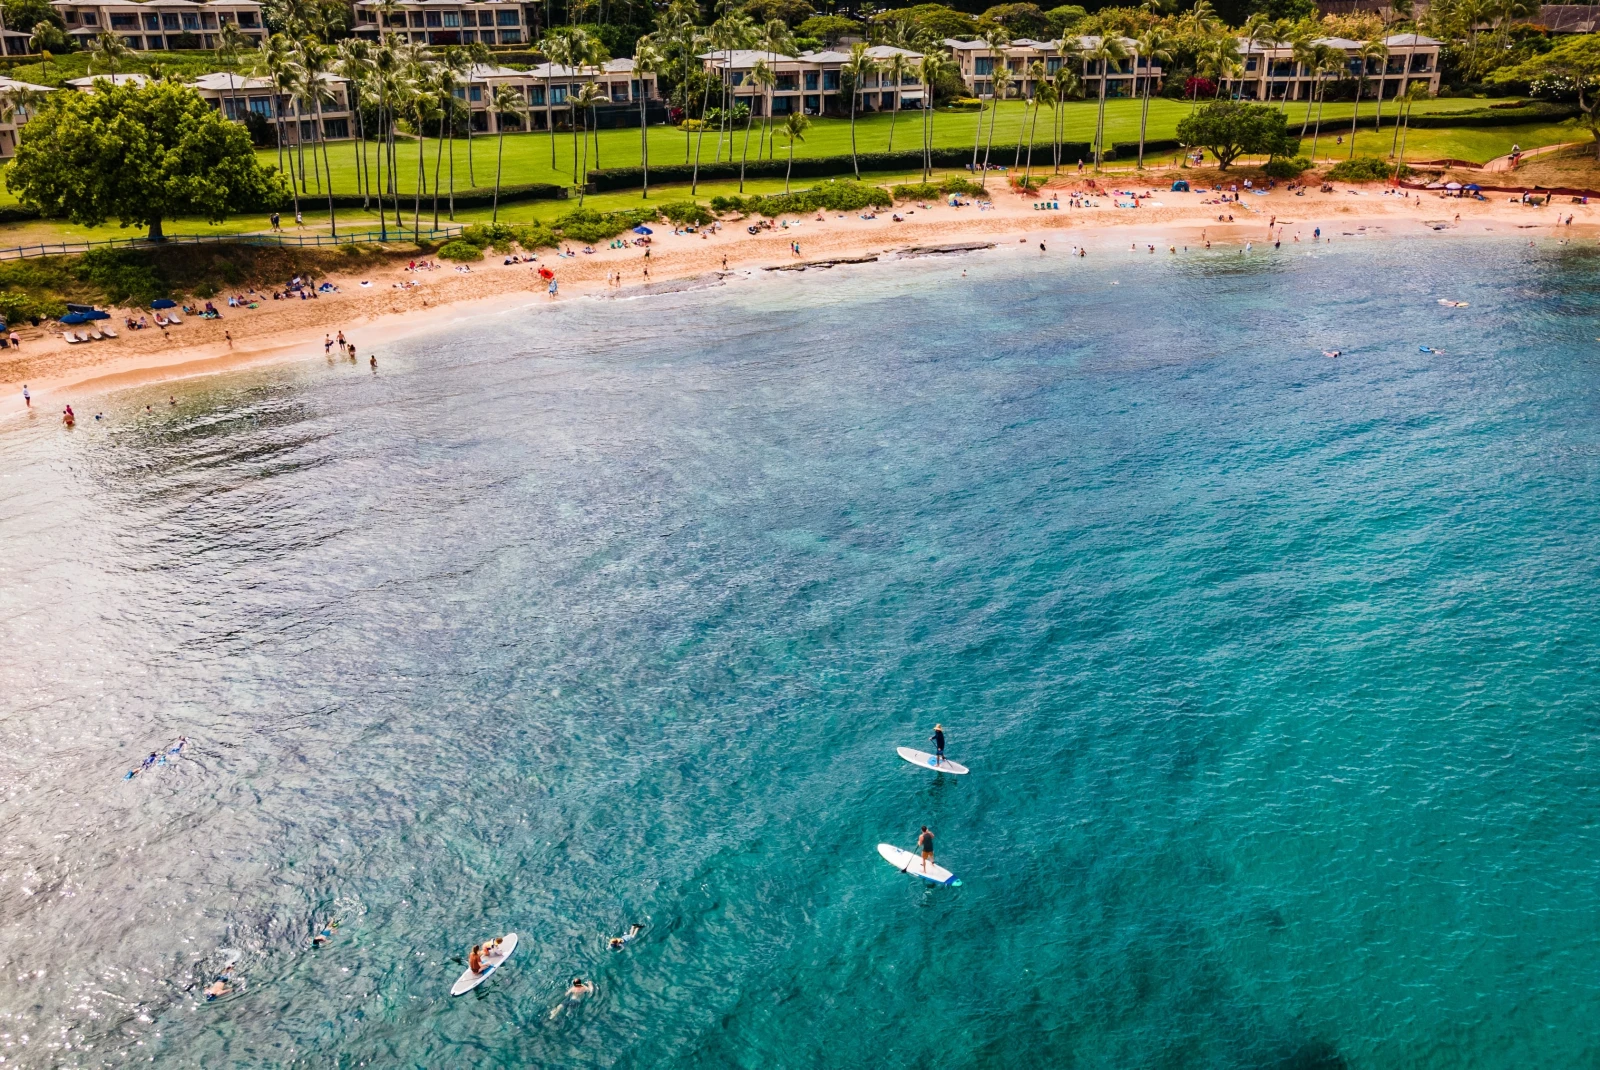 Aerial view of beach with people surfing.